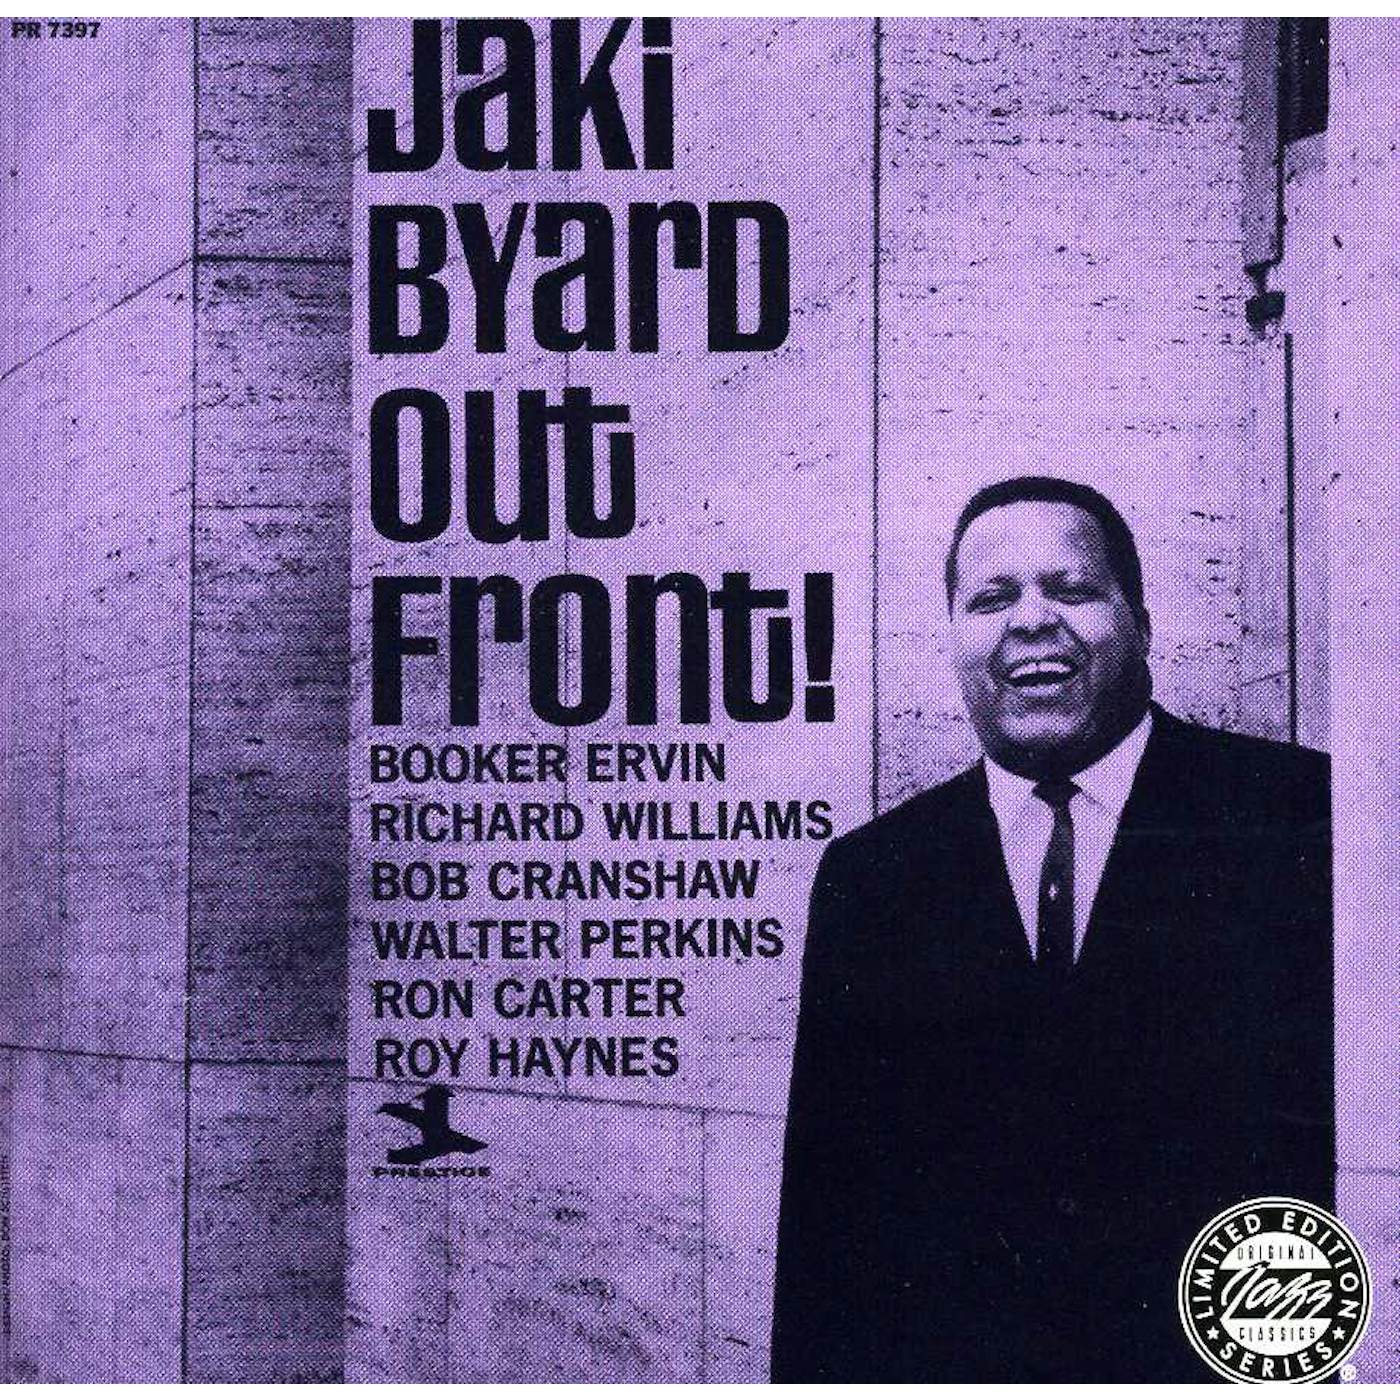 Jaki Byard OUT FRONT CD